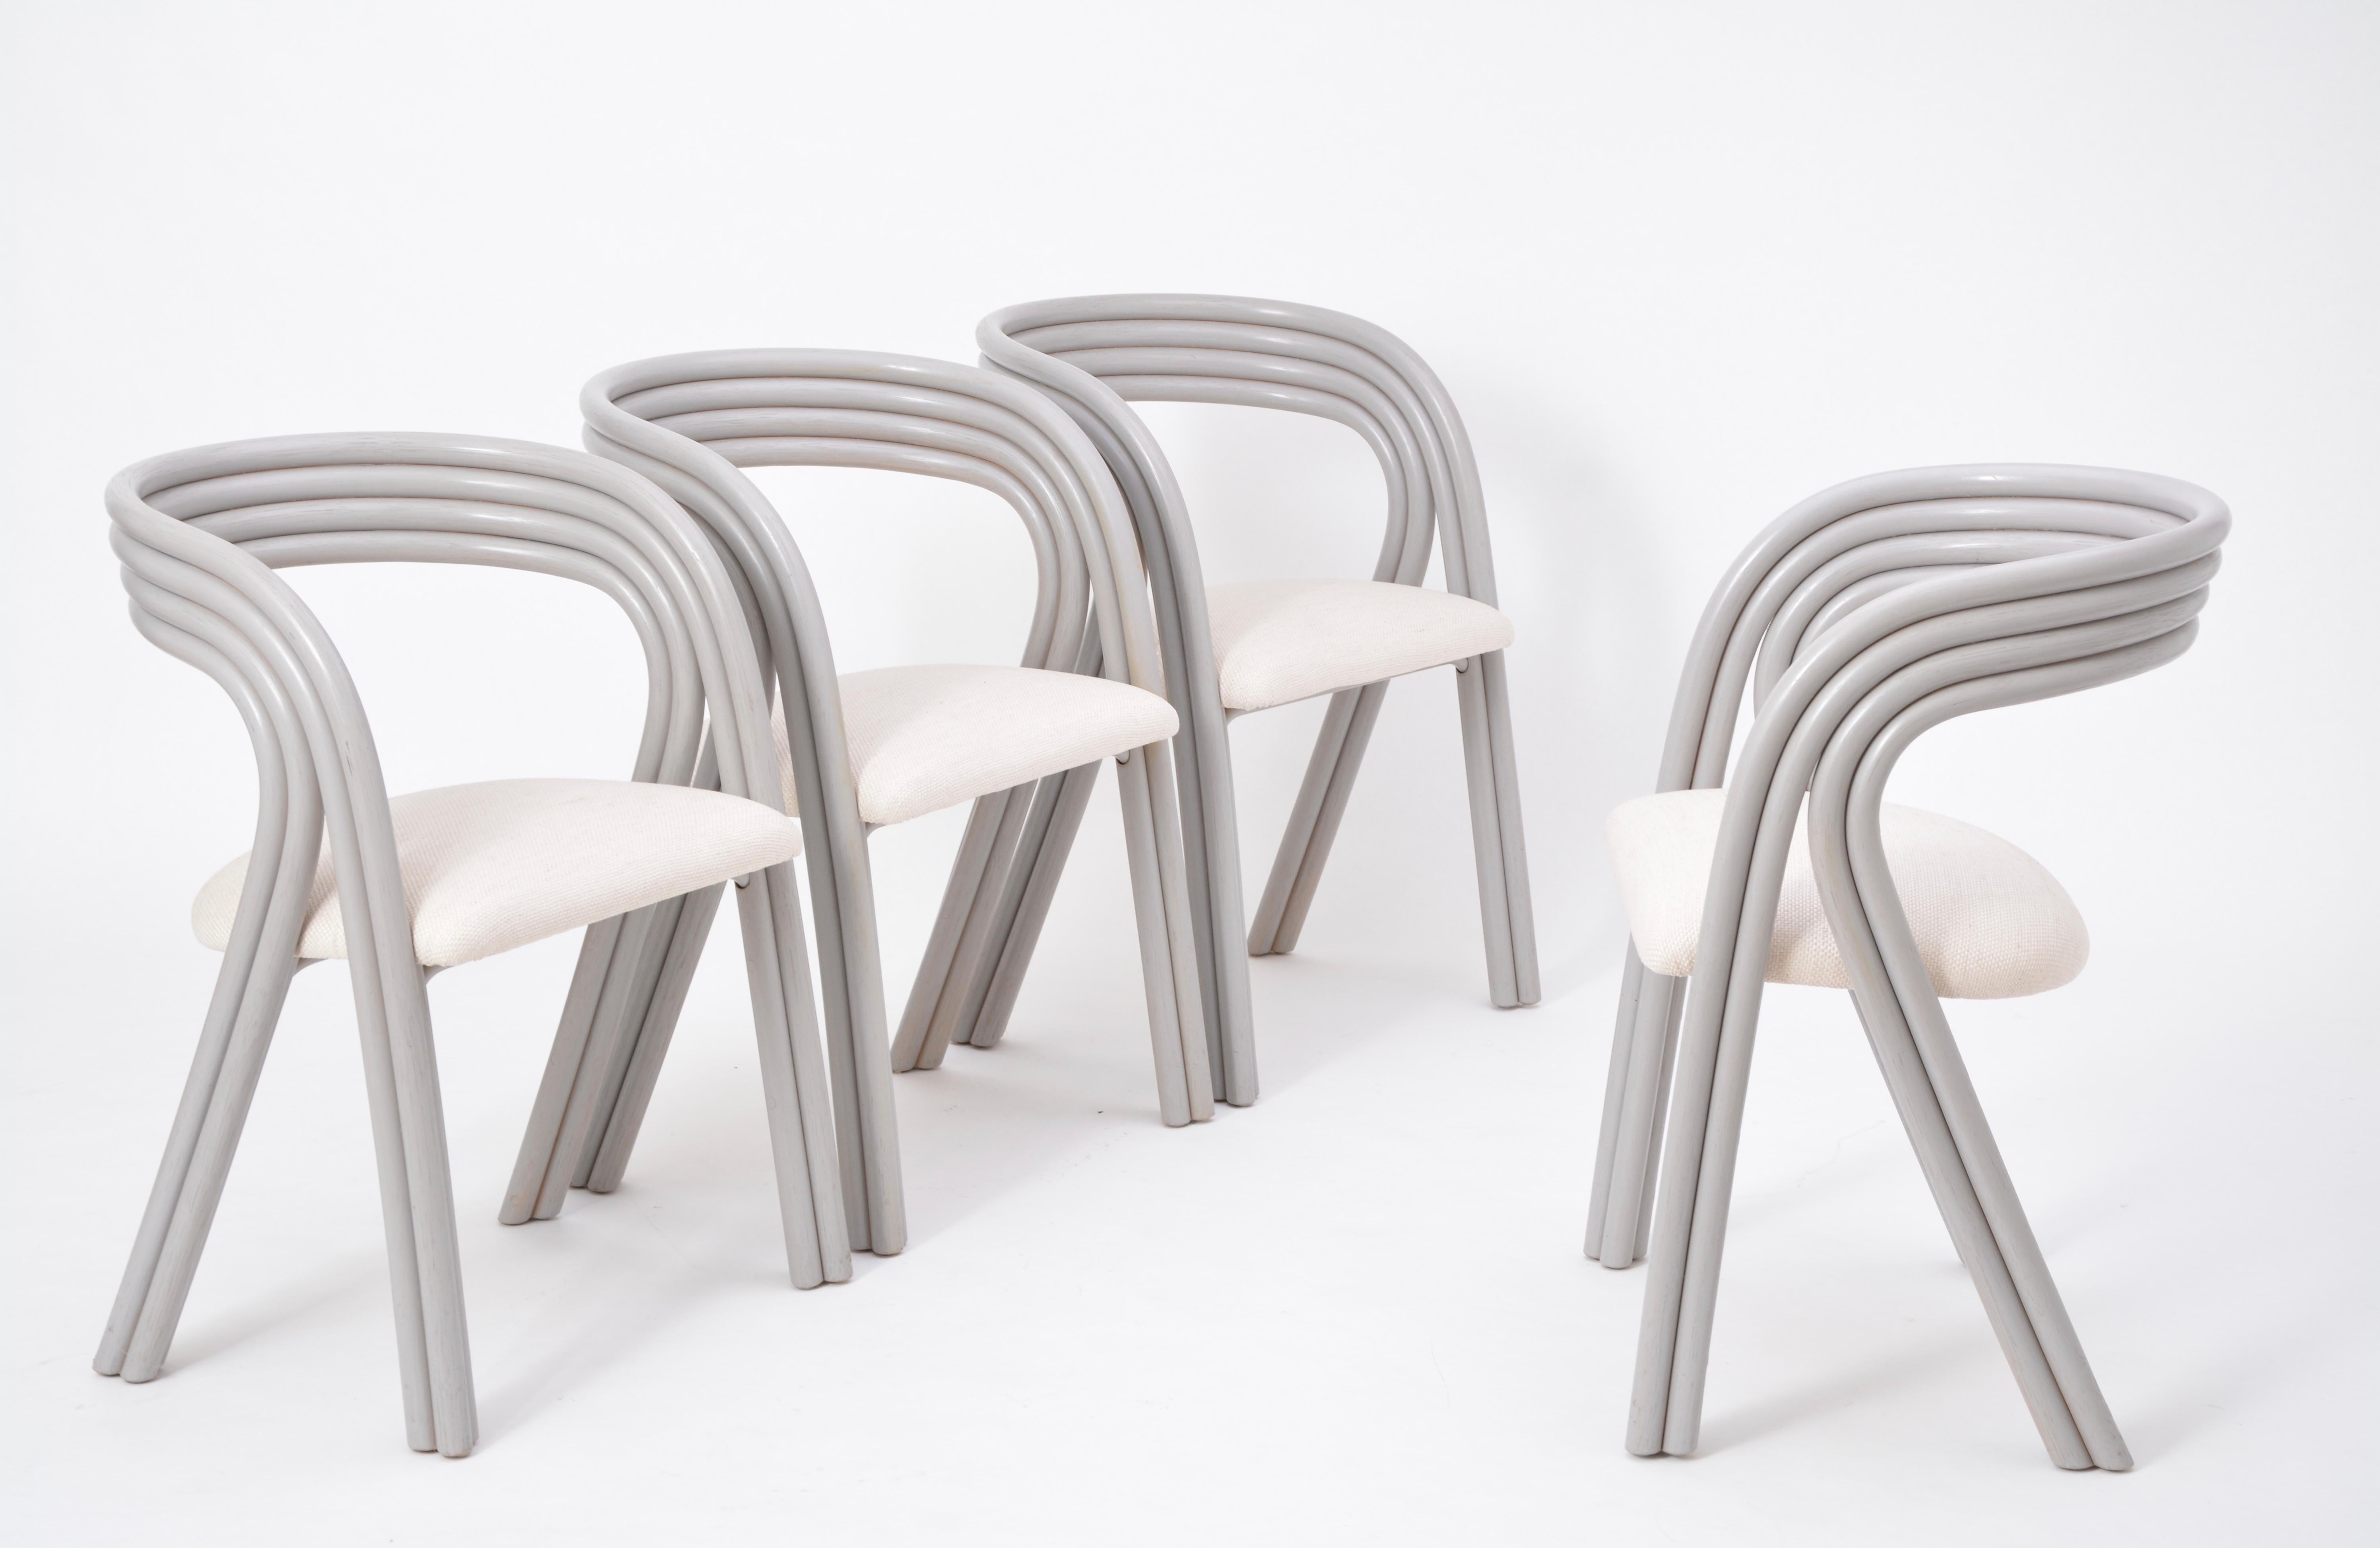 Very elegant set of four reupholstered dining chairs designed by the famous Belgian designer Axel Enthoven for Rohé Noordwolde. The sculptured frames are made of grey colored bended rattan. The set is in an excellent vintage condition. Untypical for